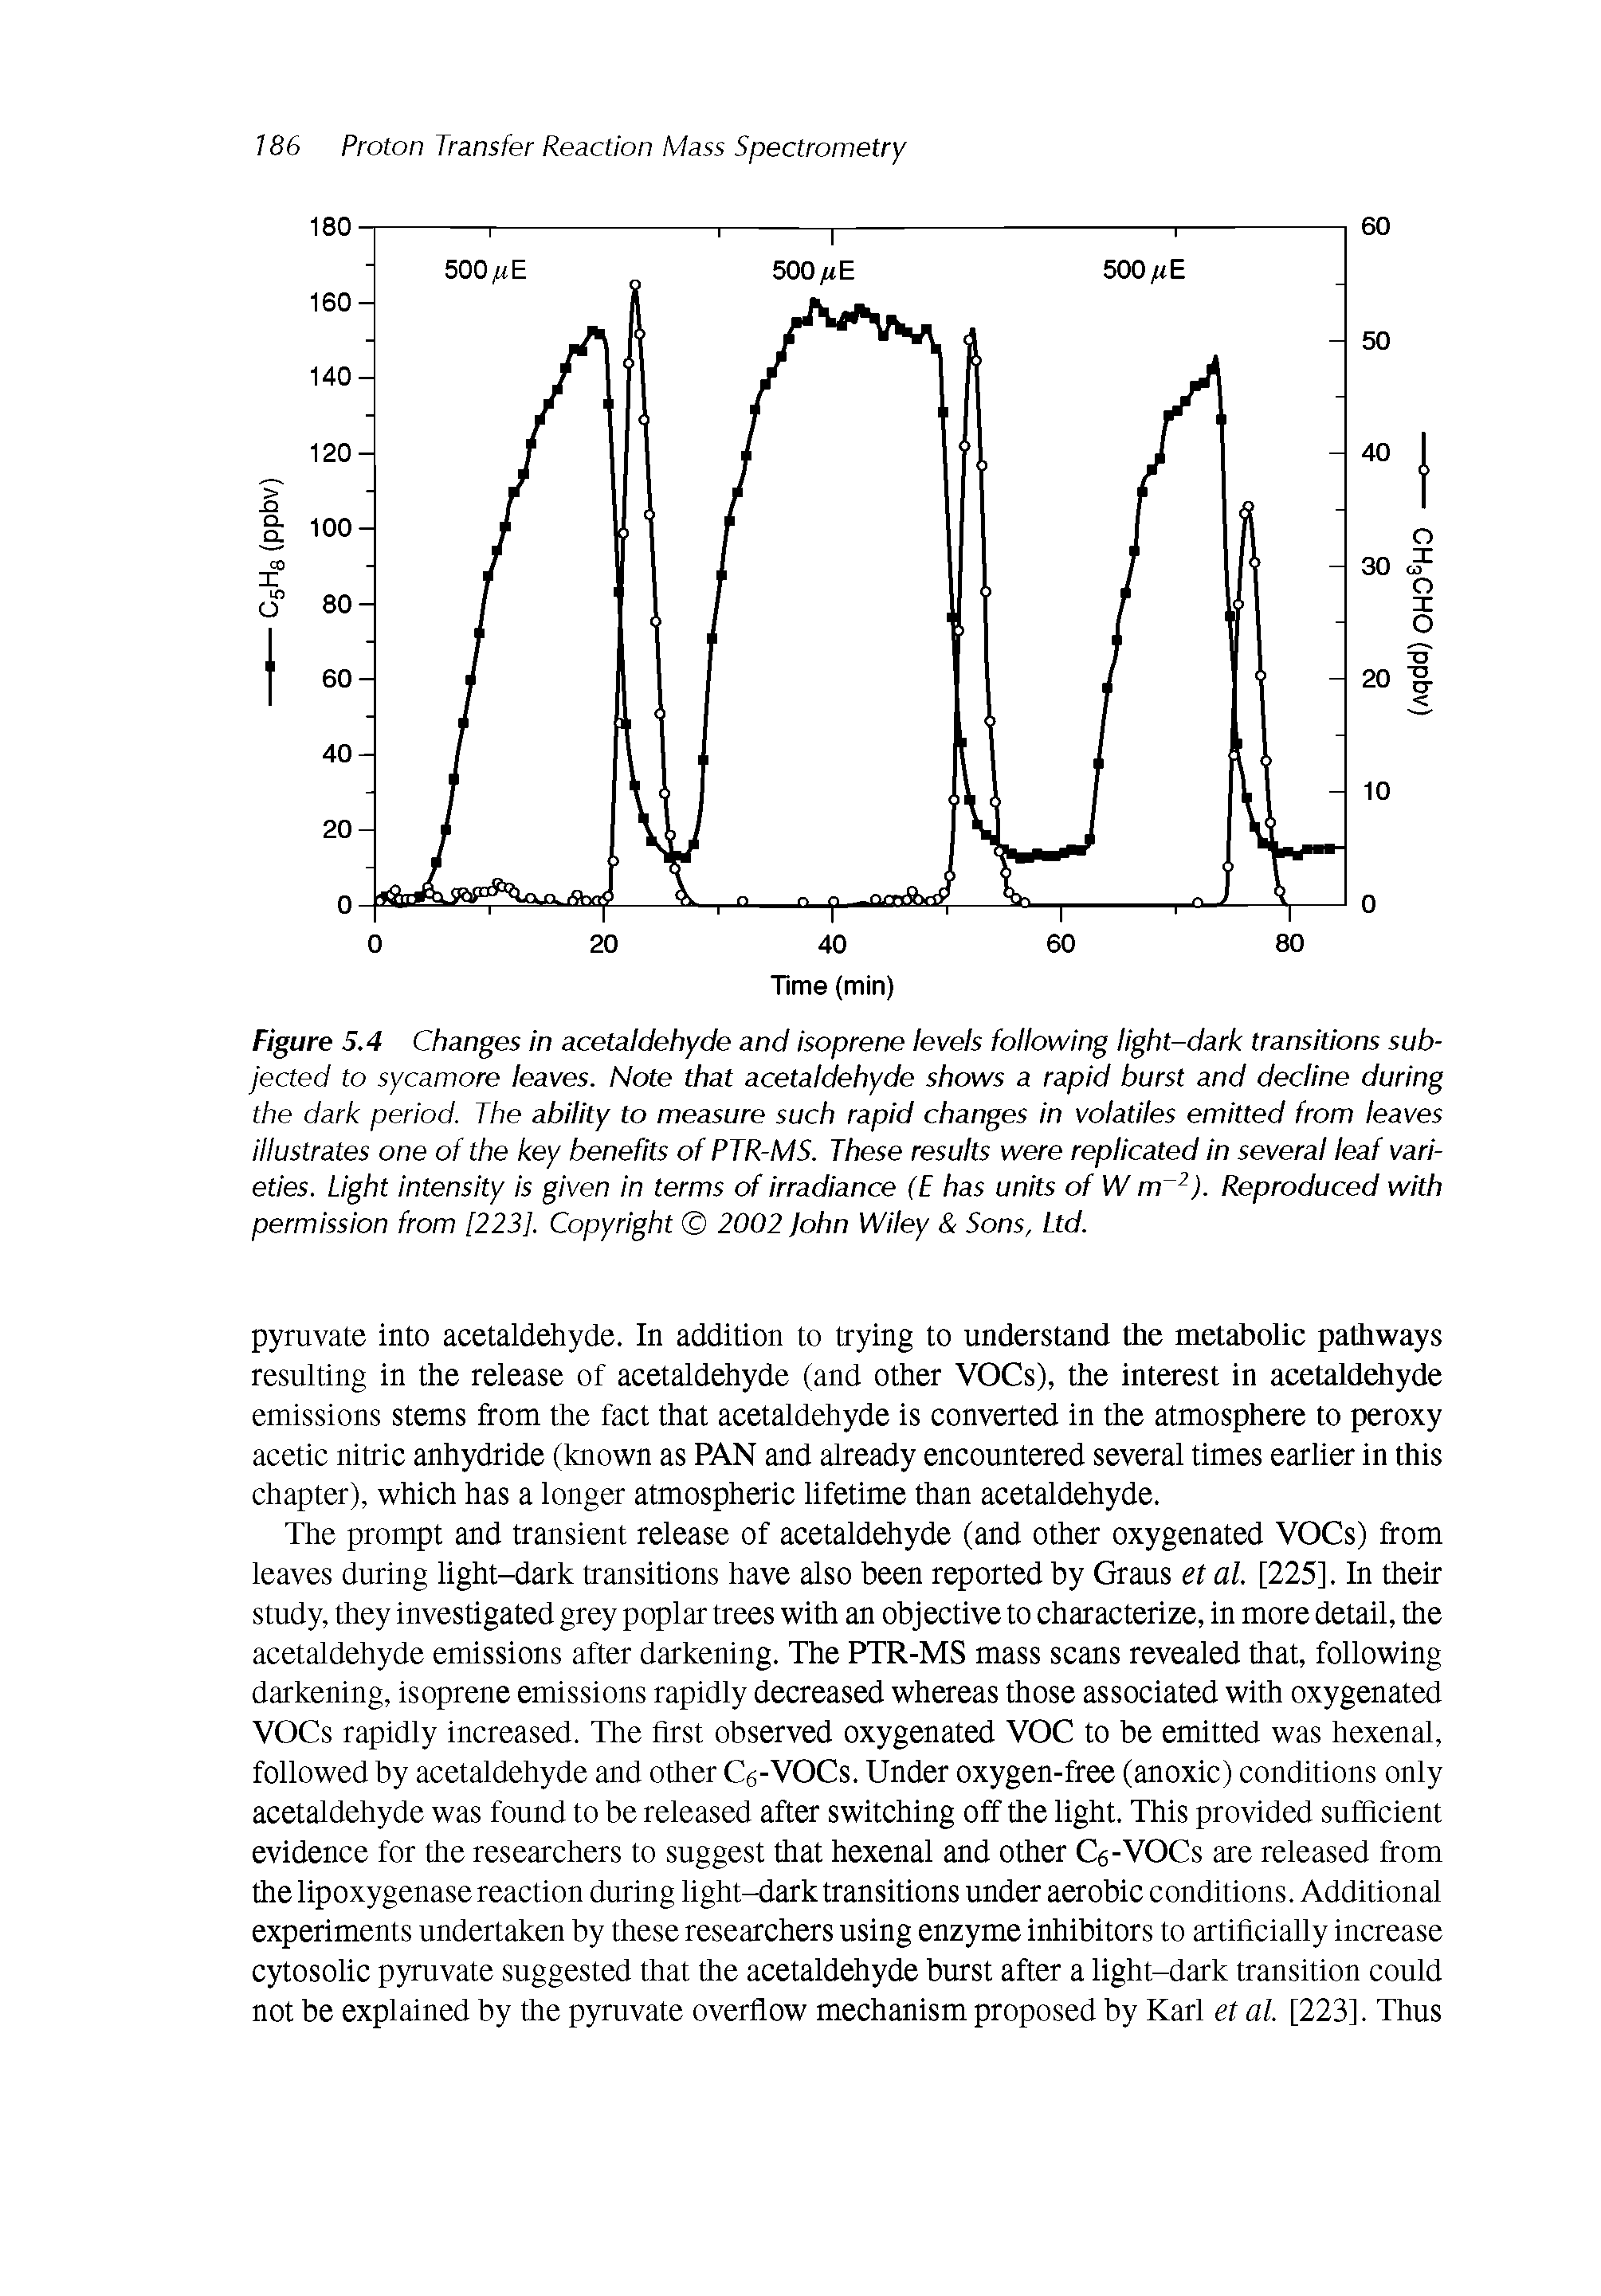 Figure 5.4 Changes in acetaldehyde and isoprene levels following light-dark transitions subjected to sycamore leaves. Note that acetaldehyde shows a rapid burst and decline during the dark period. The ability to measure such rapid changes in volatiles emitted from leaves illustrates one of the key benefits of PTR-MS. These results were replicated in several leaf varieties. Light intensity is given in terms of irradiance (E has units of W m ). Reproduced with permission from [223]. Copyright 2002 John Wiley Sons, Ltd.